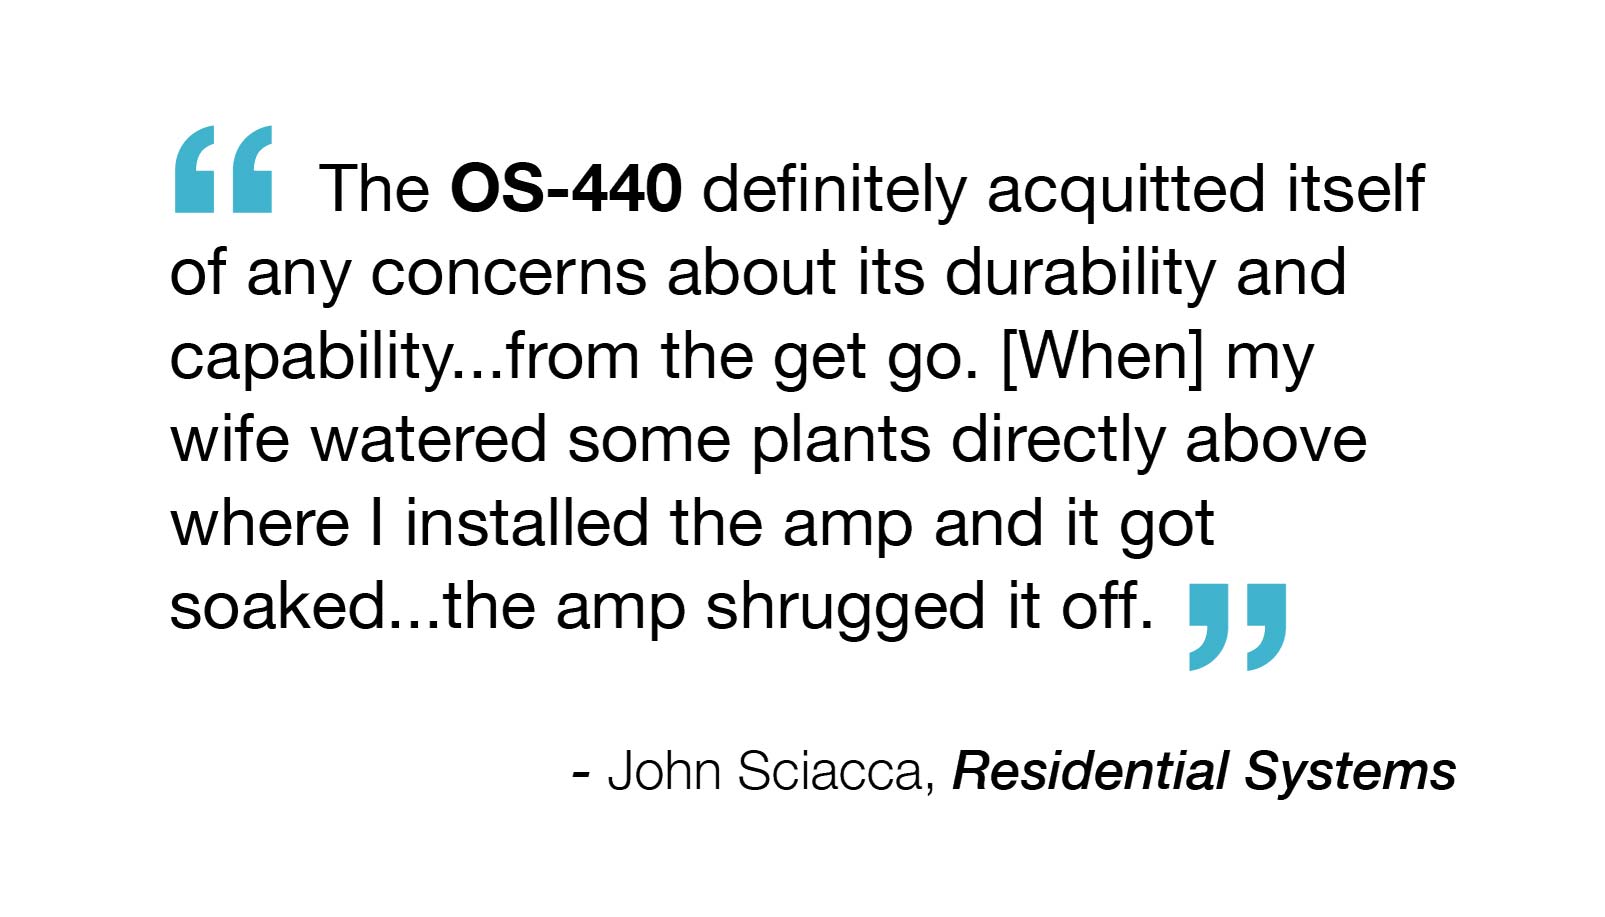 "The OS-440 definitely acquitted itself of any concerns about its durability and capability… from the get go. [When] my wife watered some plants directly above where I installed the amp and it got soaked… the amp shrugged it off." – John Sciacca